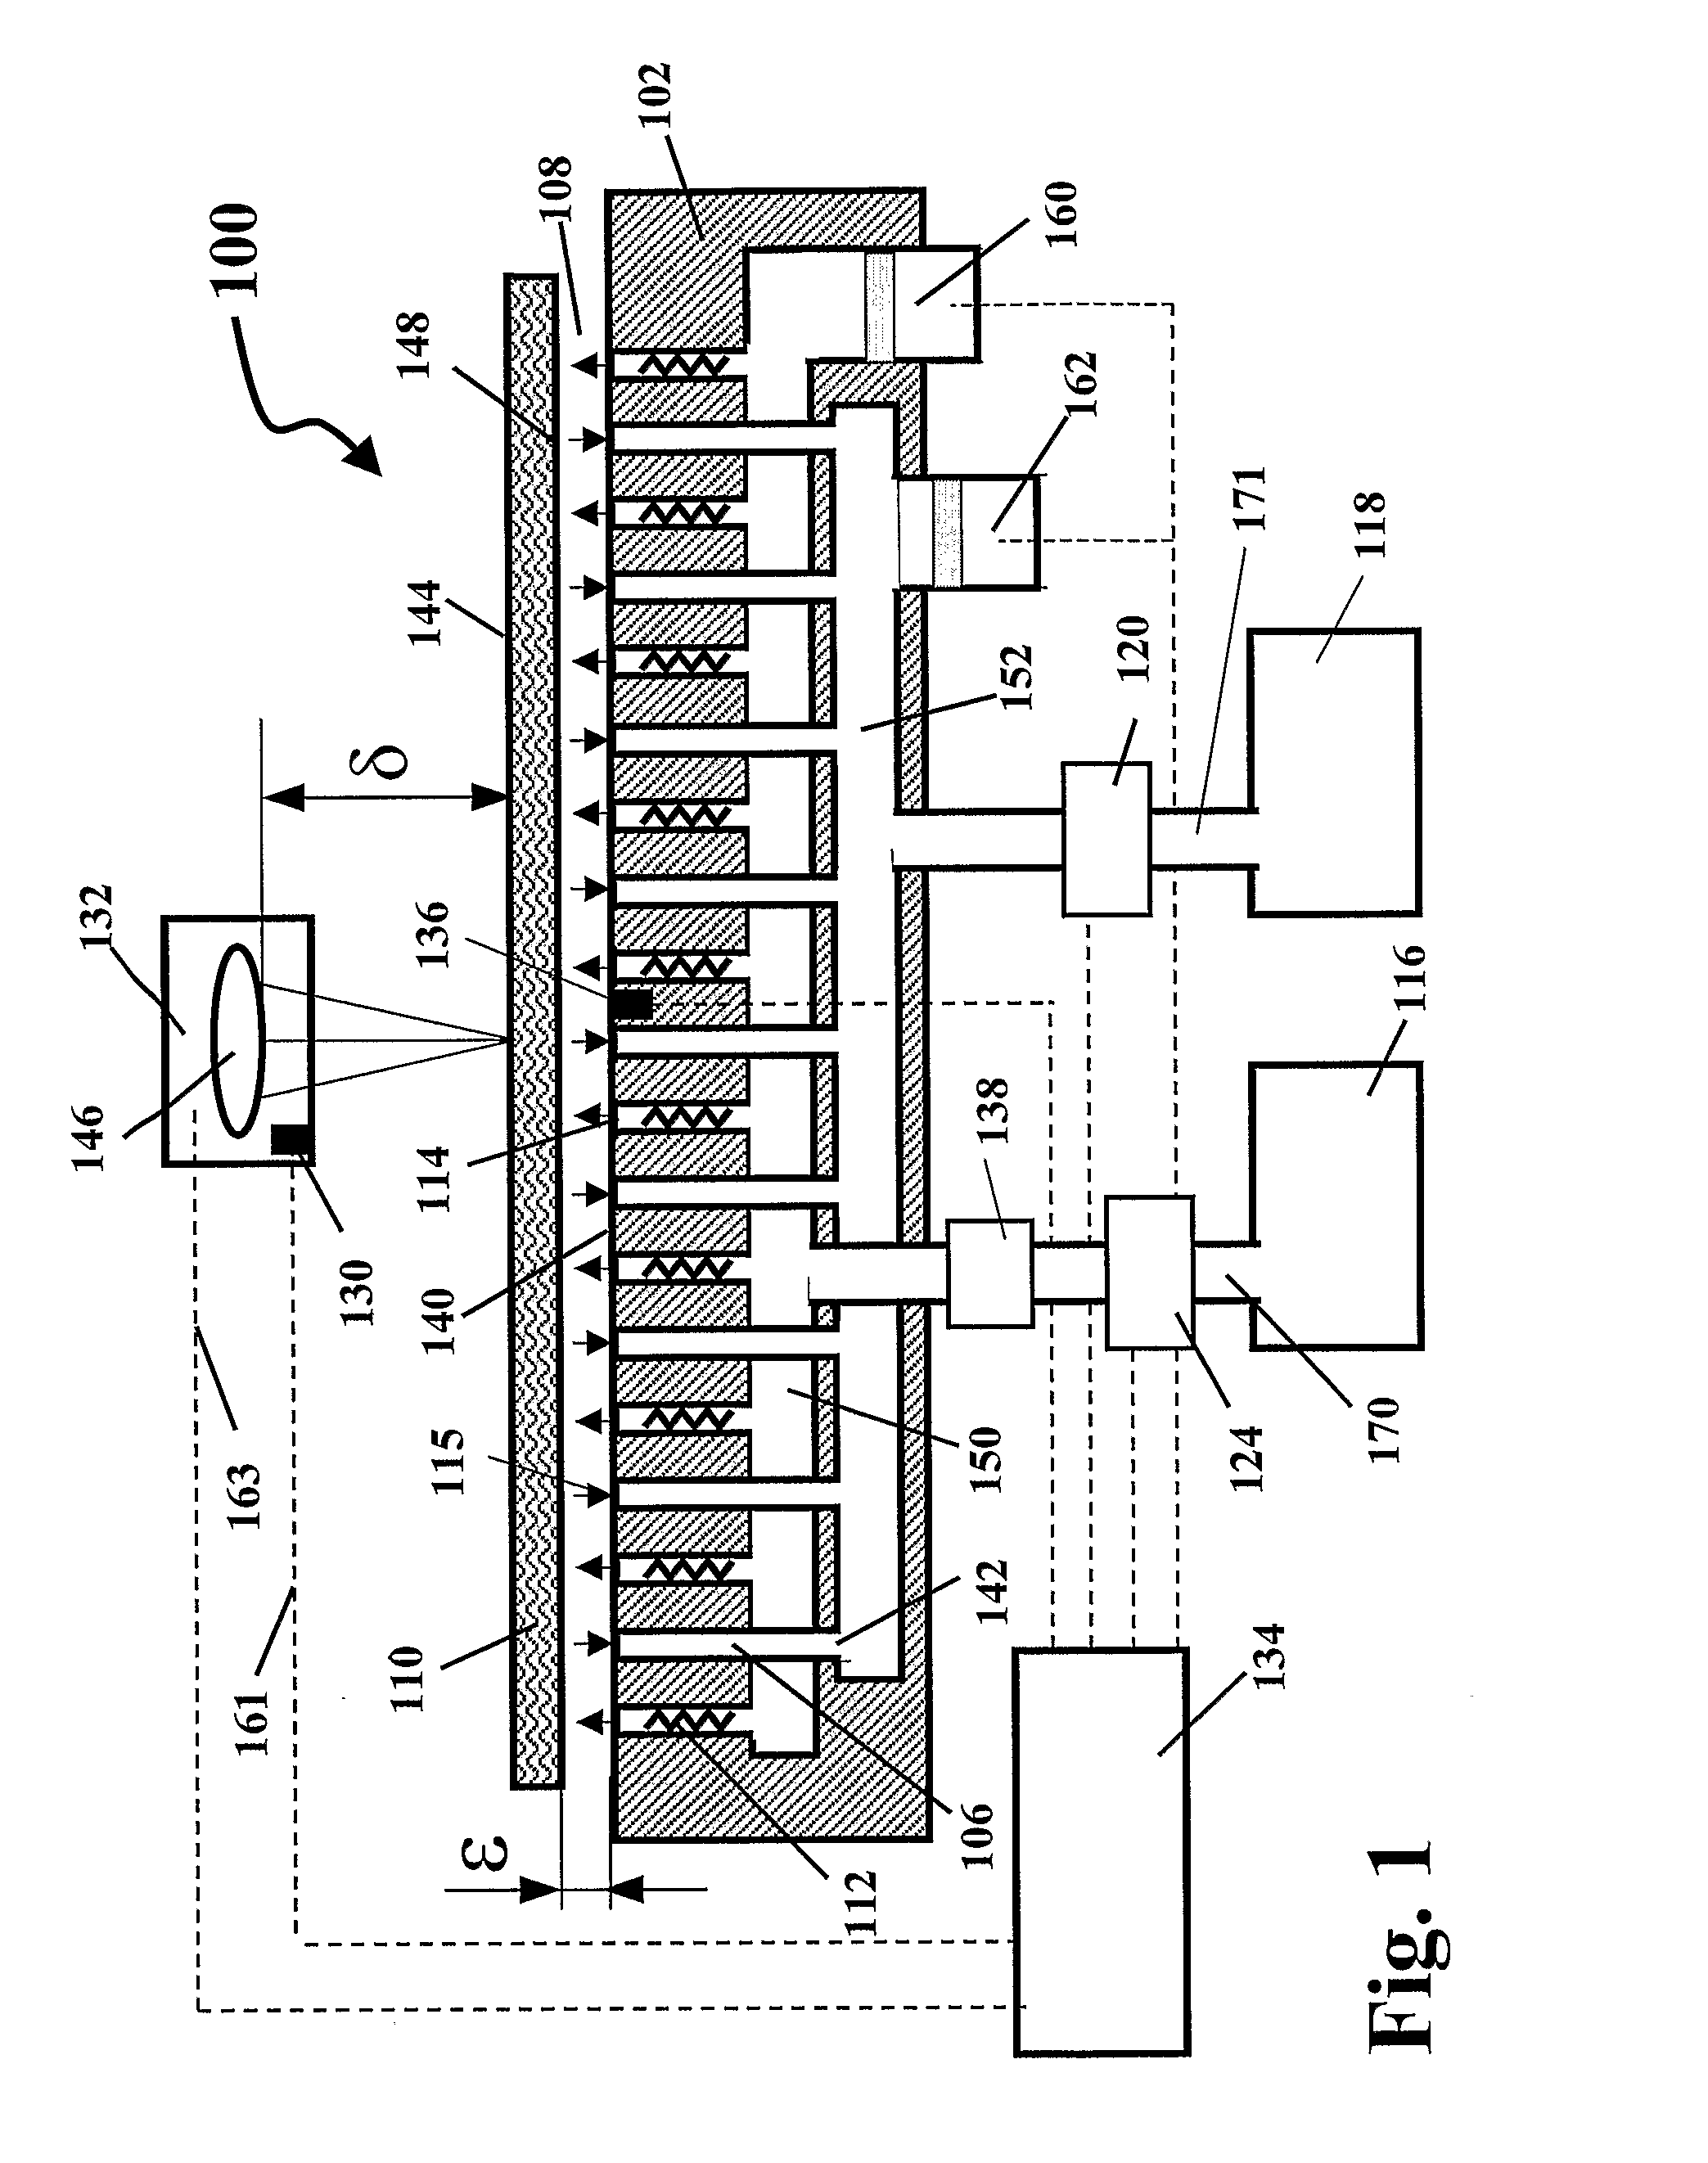 Non-contact support platforms for distance adjustment